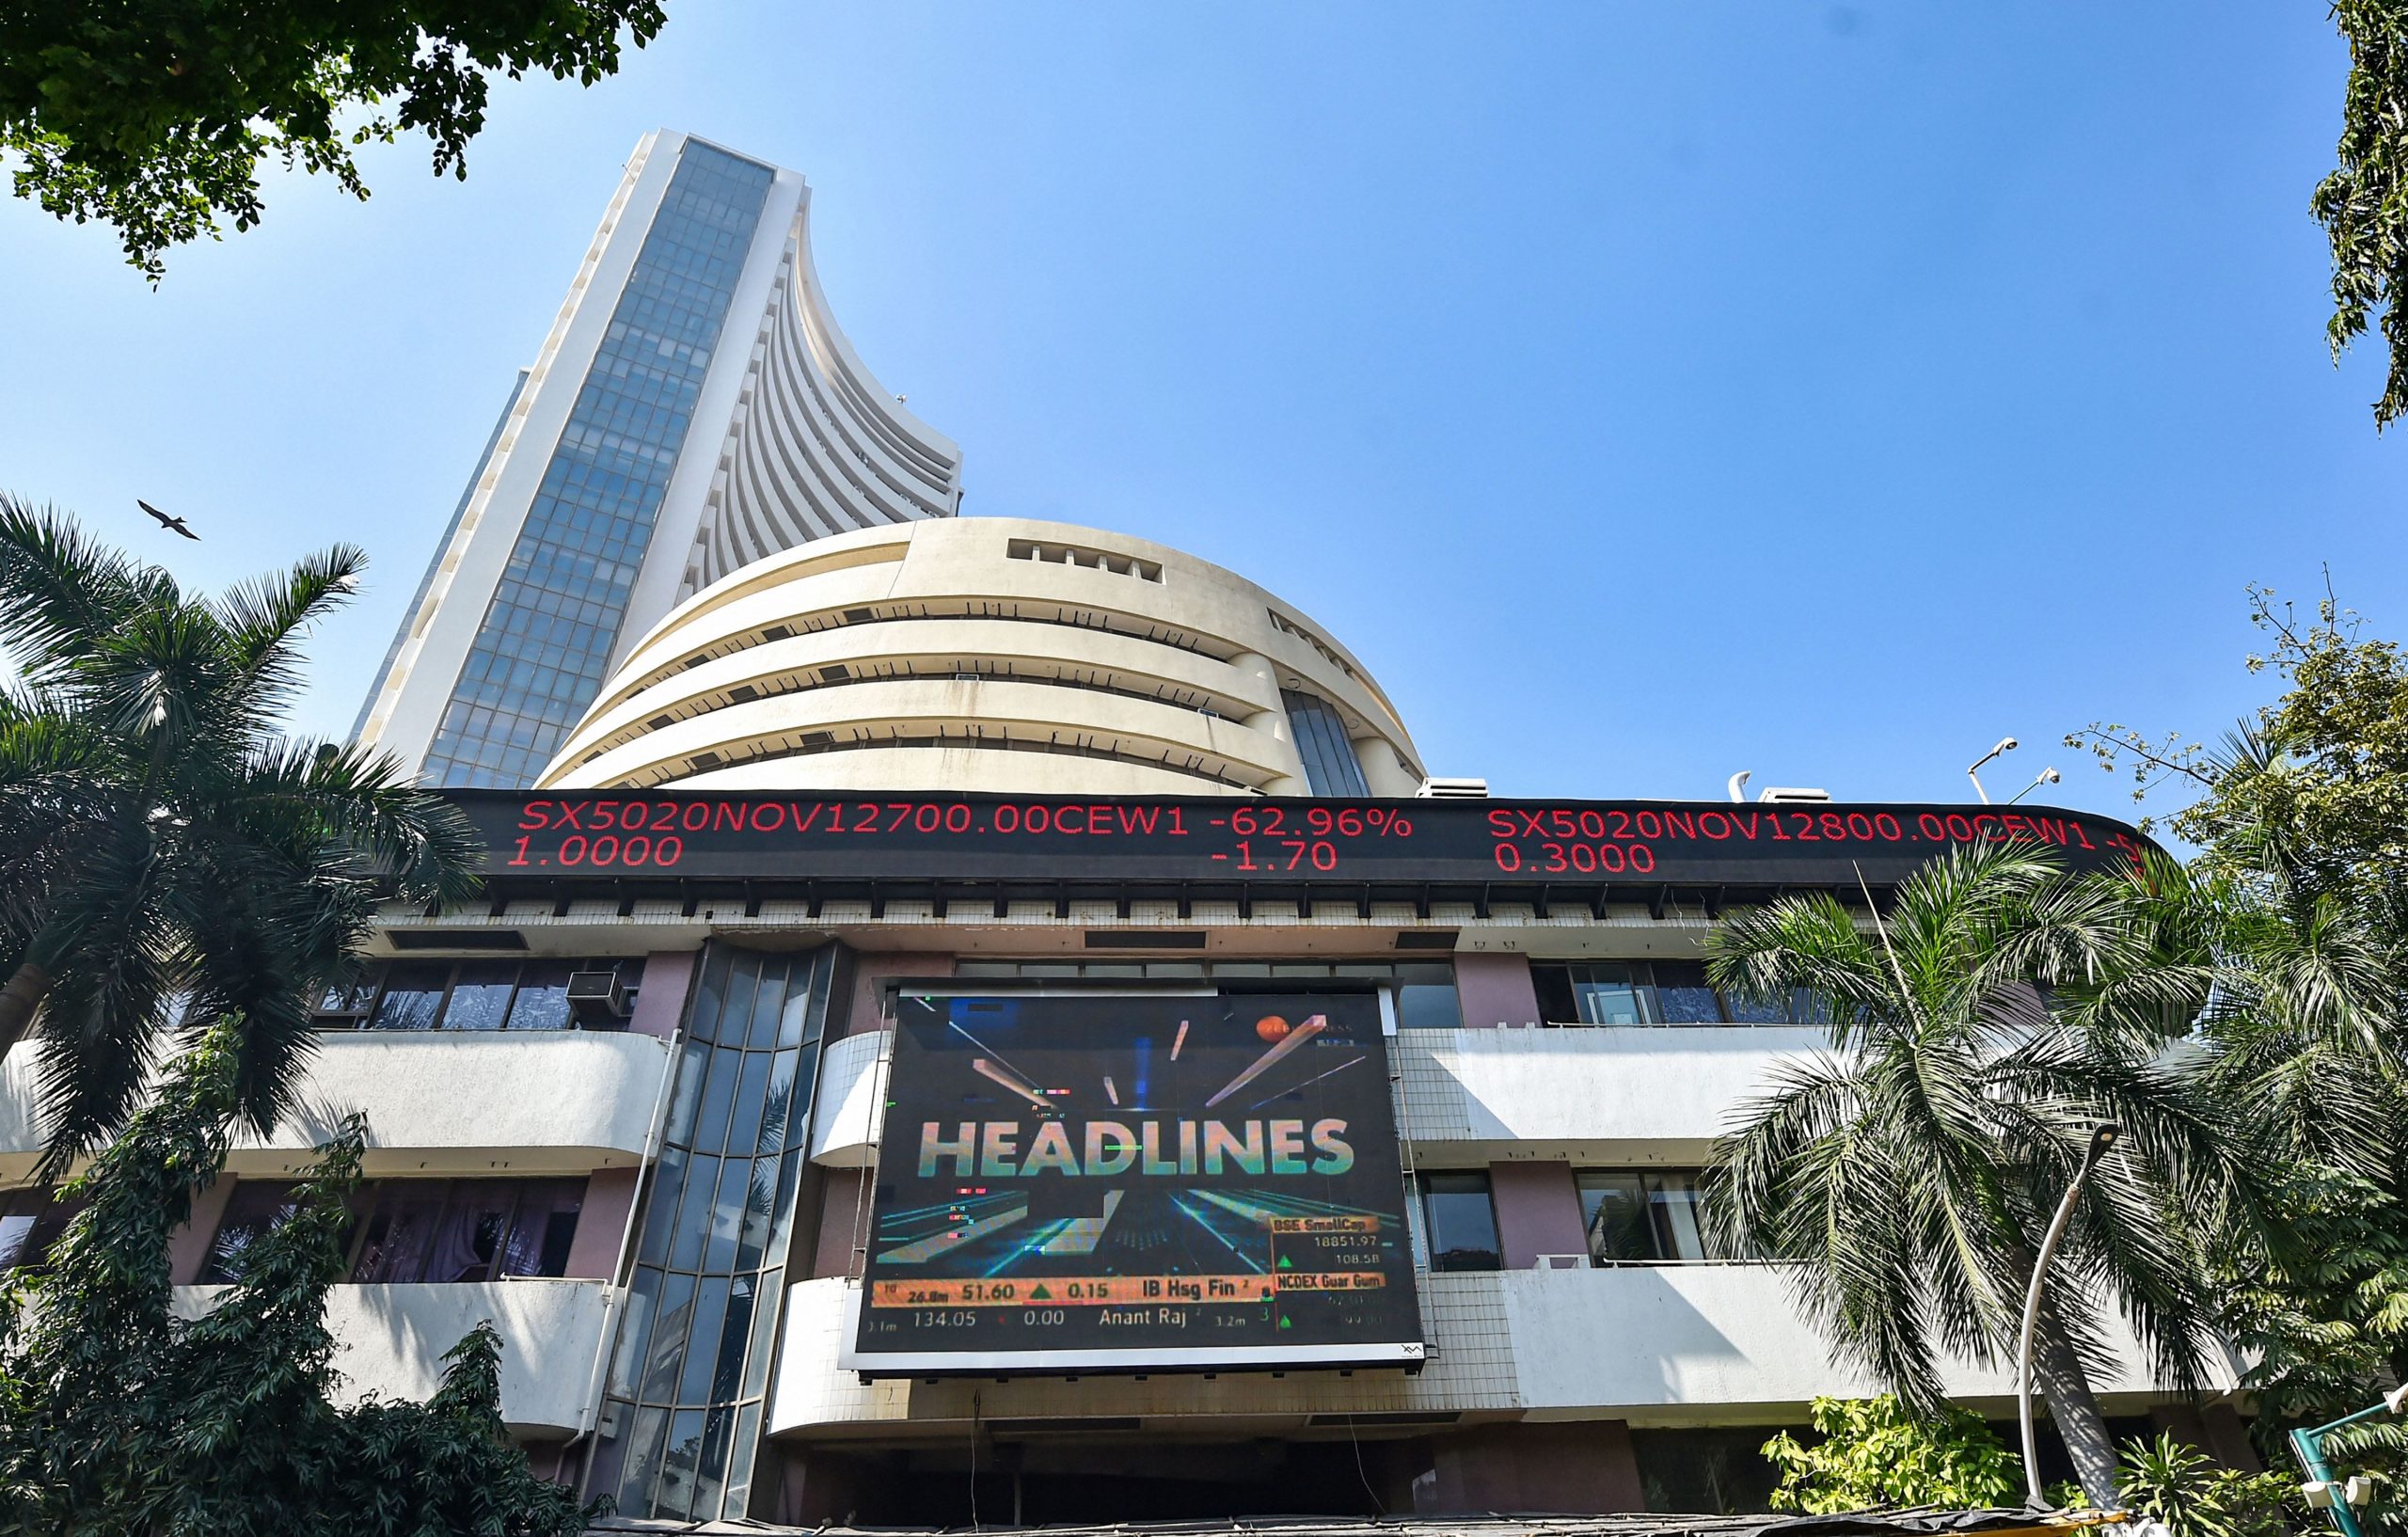 Trending Stocks: Religare, Zydus, Wockhardt and others in news today